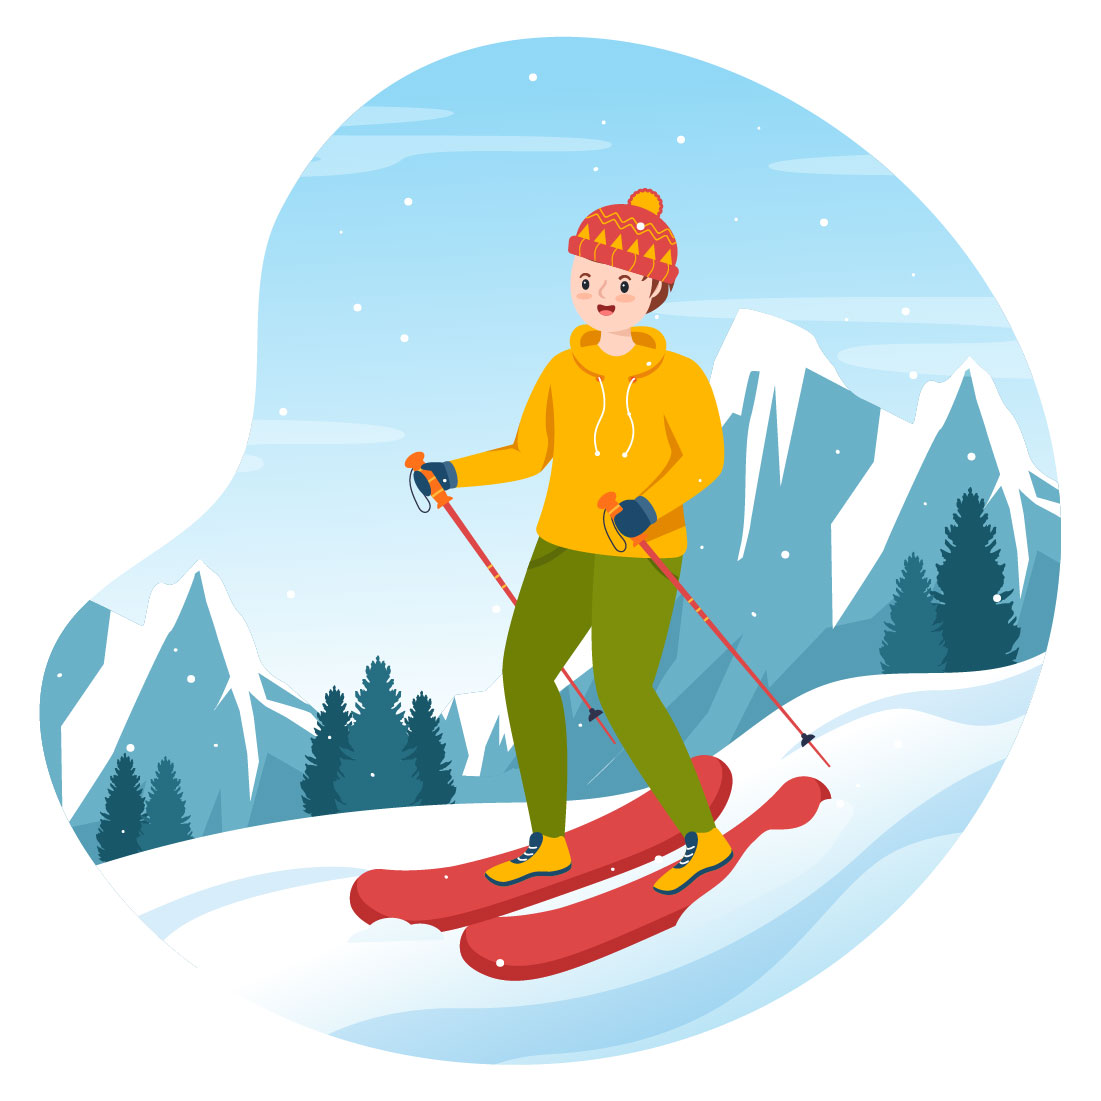 13 Snowboarding Activity Illustration Cover Image.